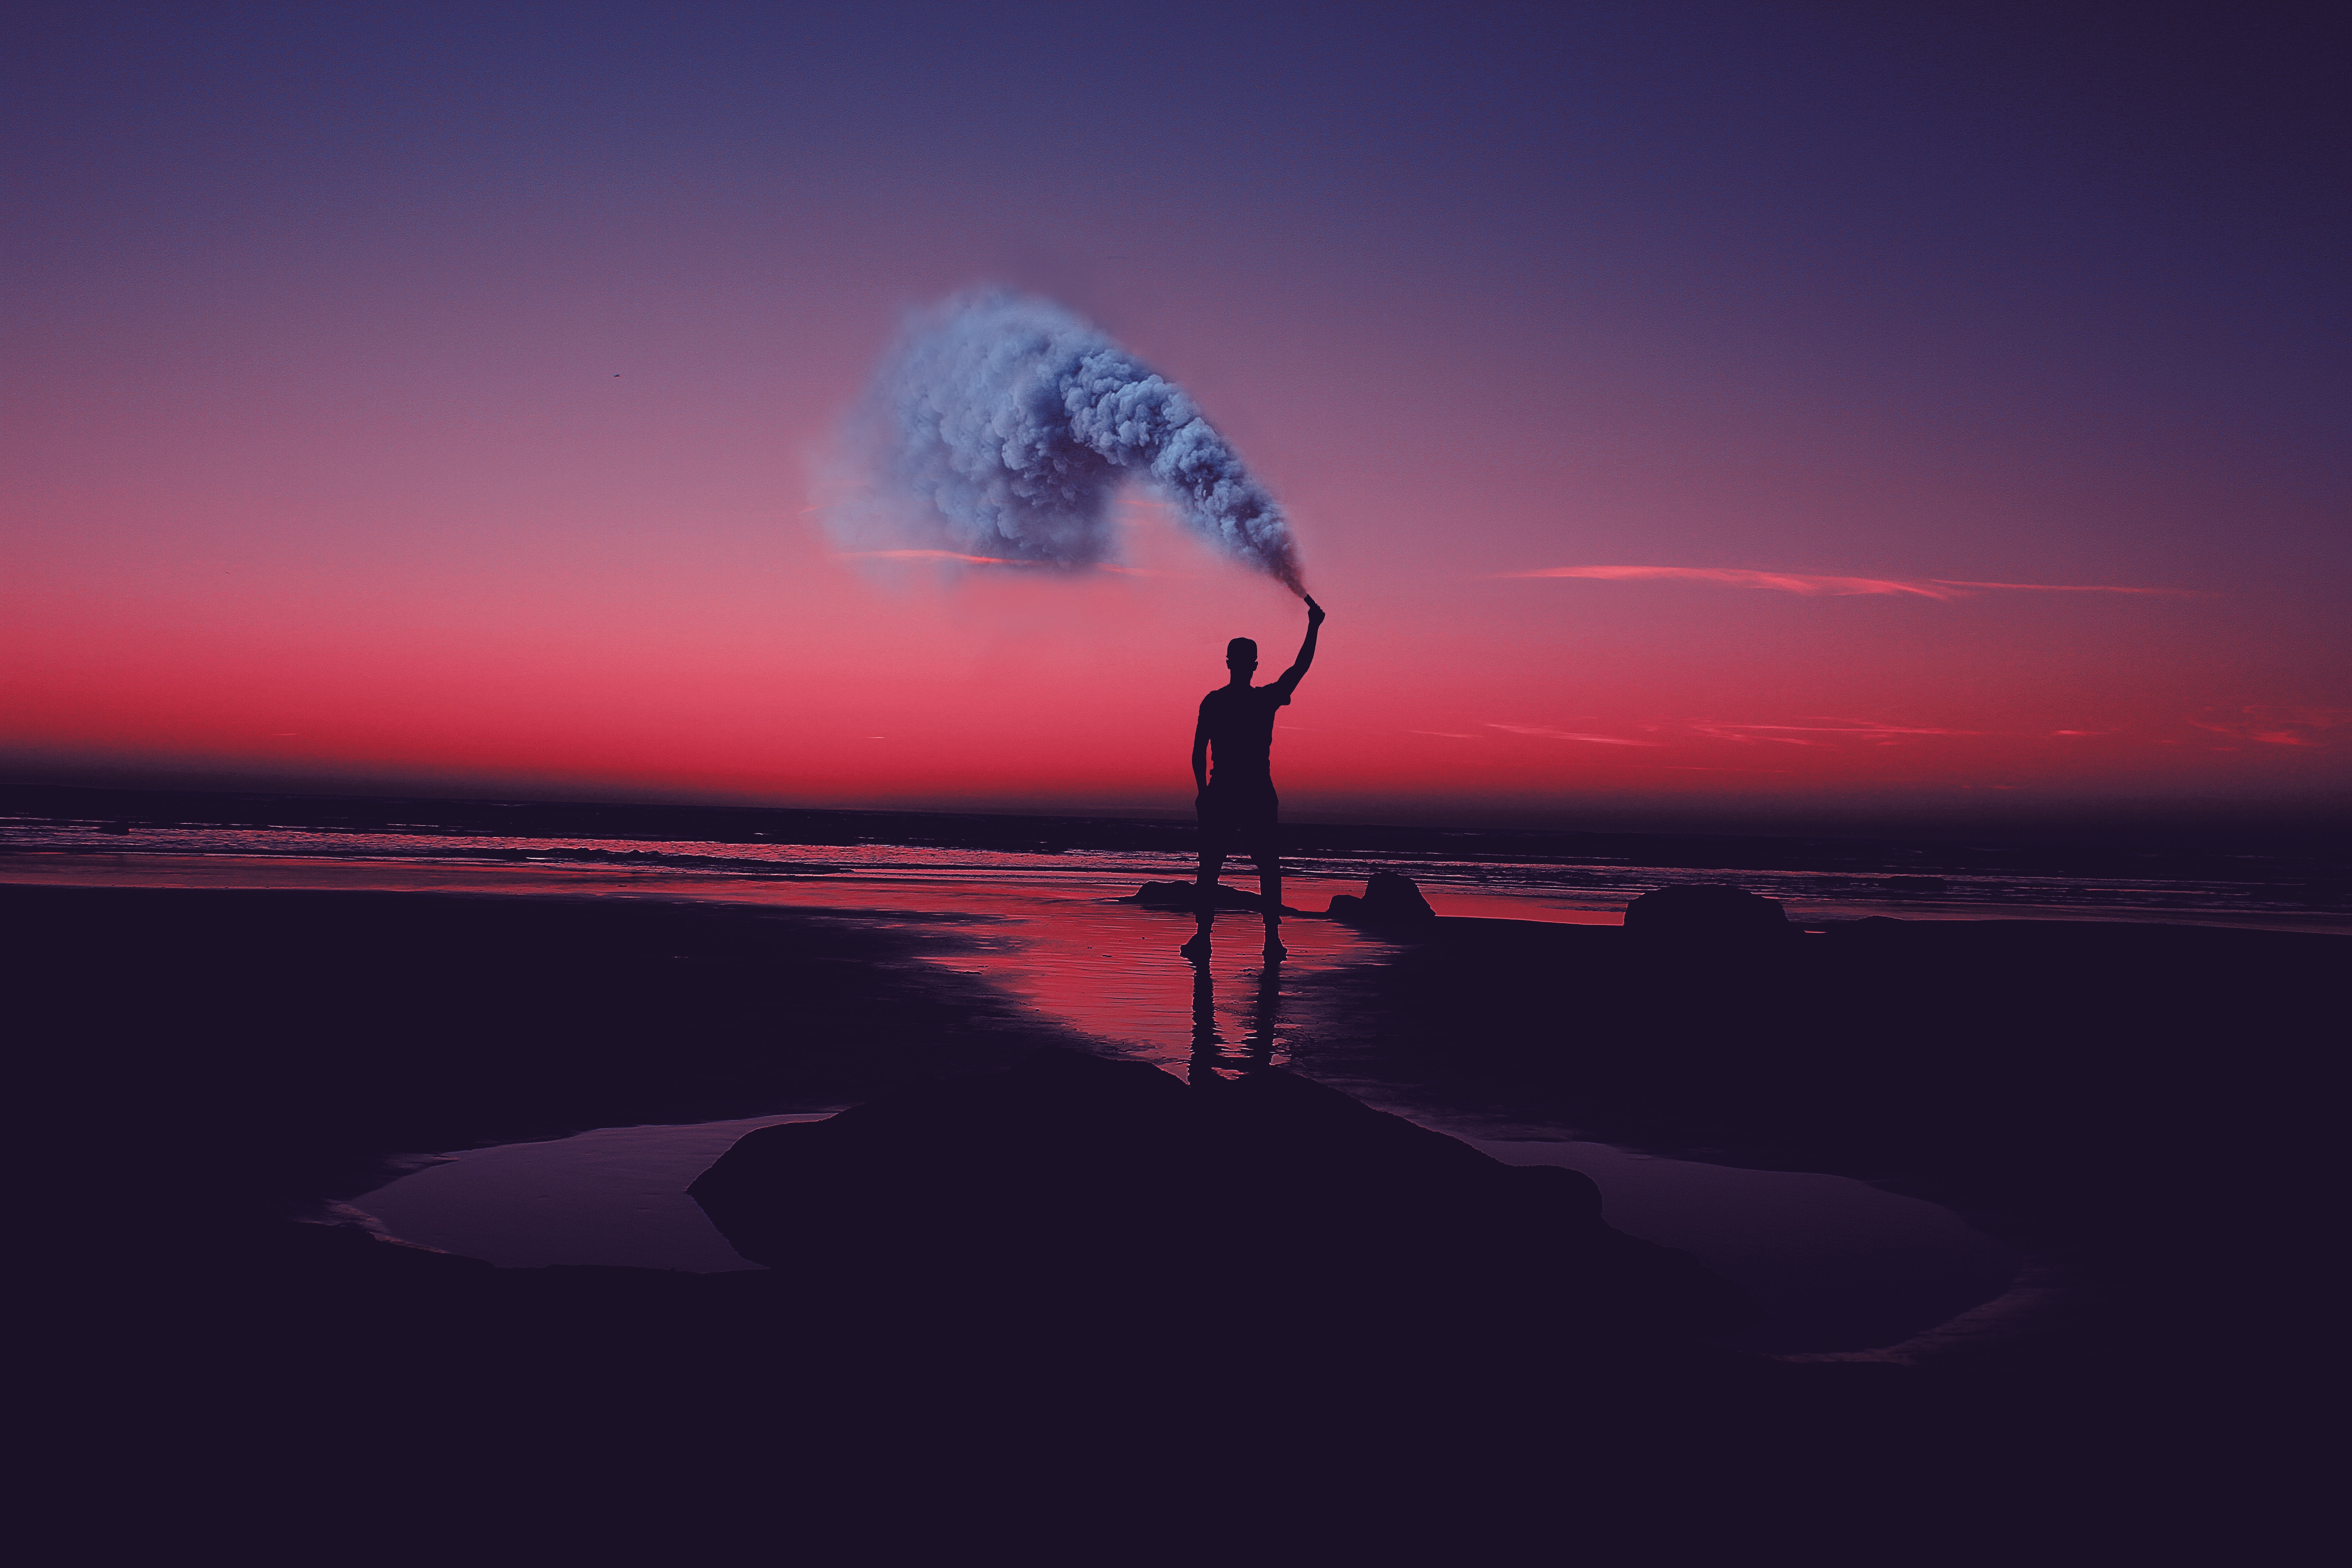 127473 download wallpaper silhouette, dark, sunset, sea, smoke, shore, bank, human, person, morocco, asilah, asila screensavers and pictures for free